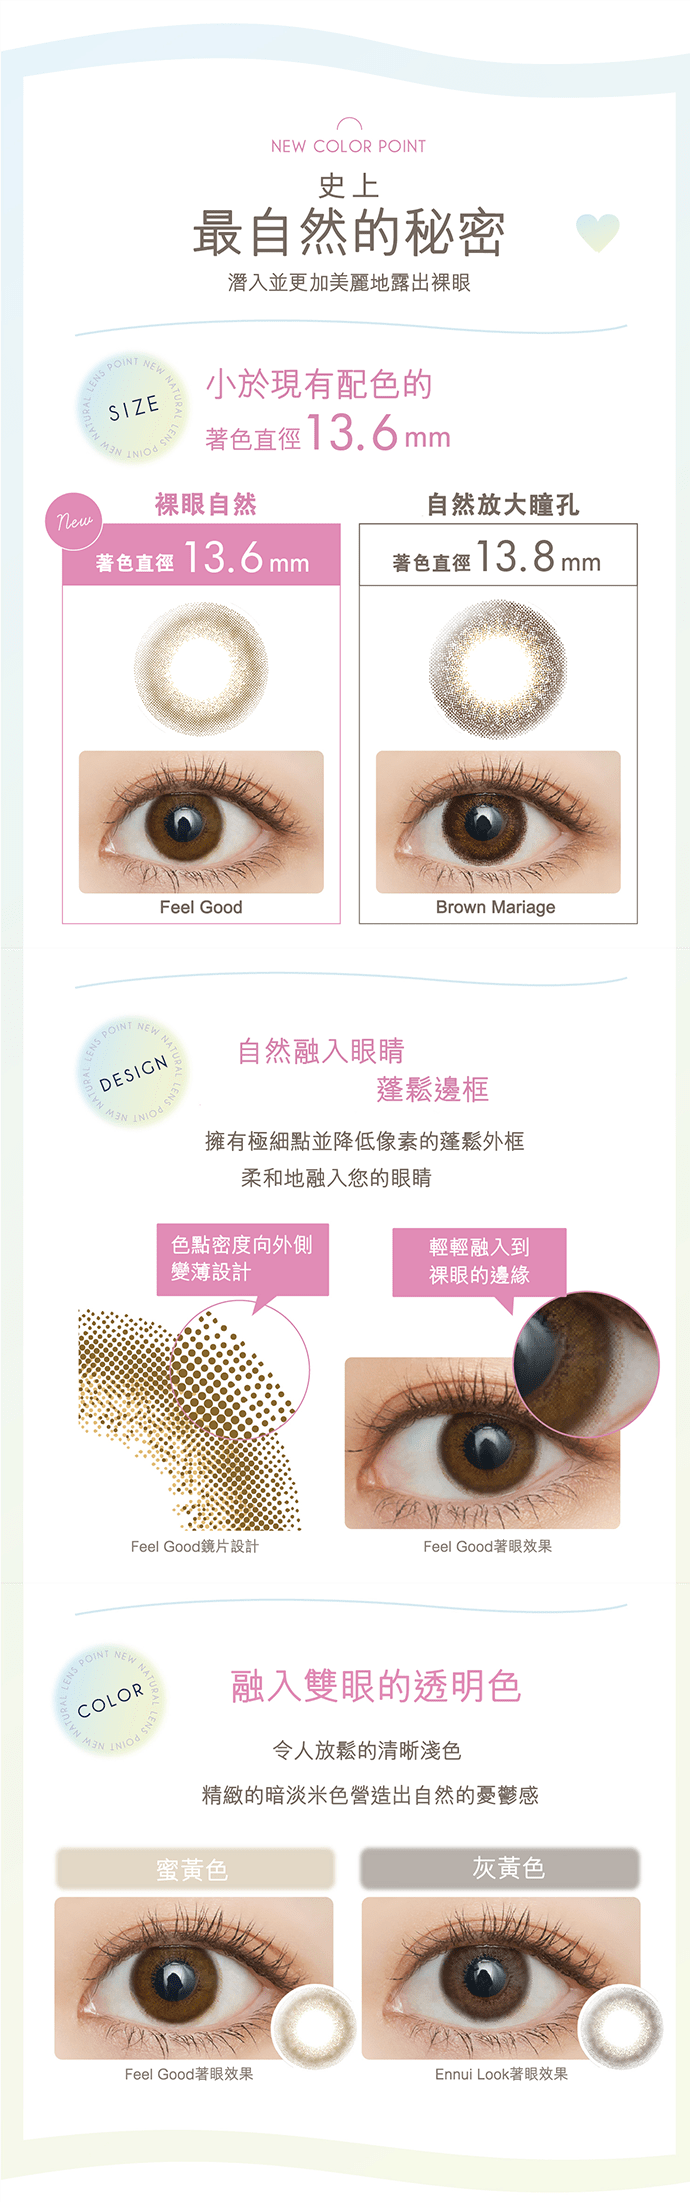 EverColor 1 Day Natural Moist Label UV Brown Mariage 有色每日抛棄隱形眼鏡 (20片裝)